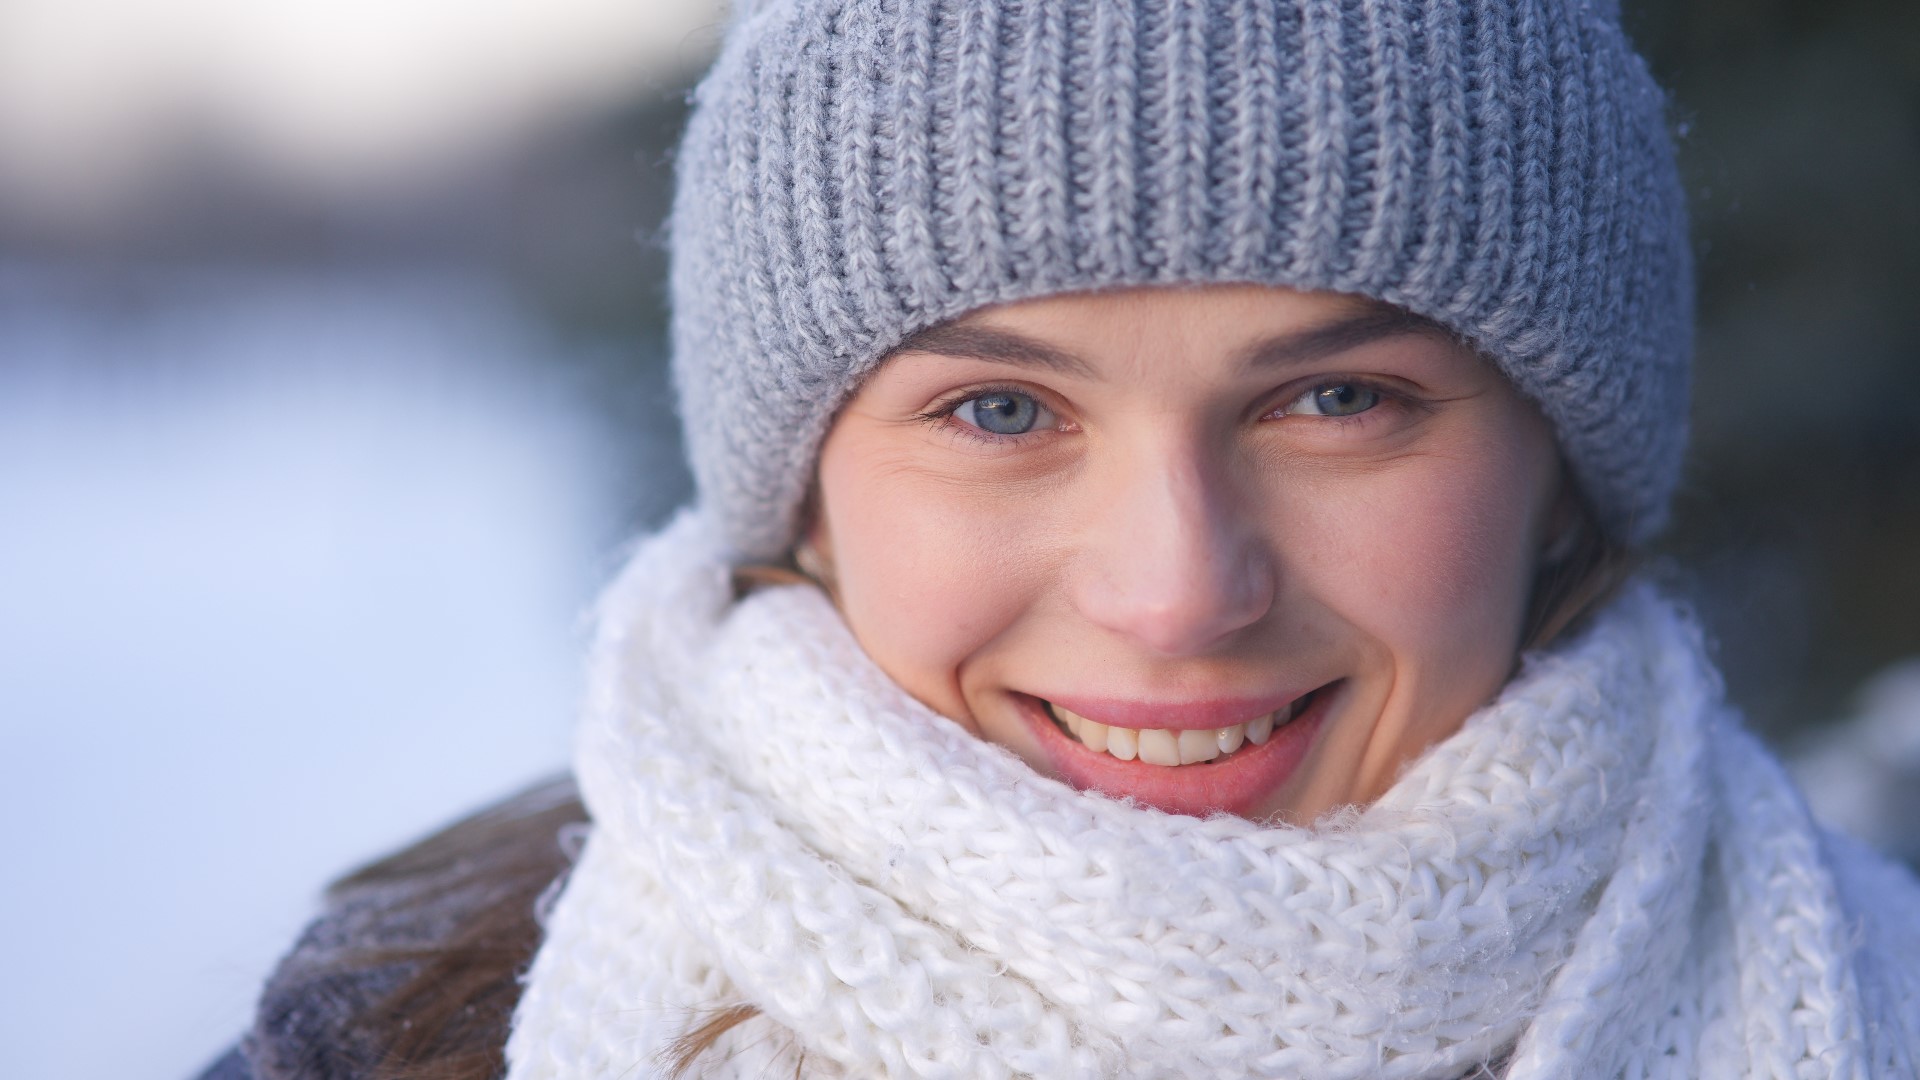 With snow on the ground, you're going to want to bundle up. Here are some of the things the Missouri Department of Health wants you to keep in mind.